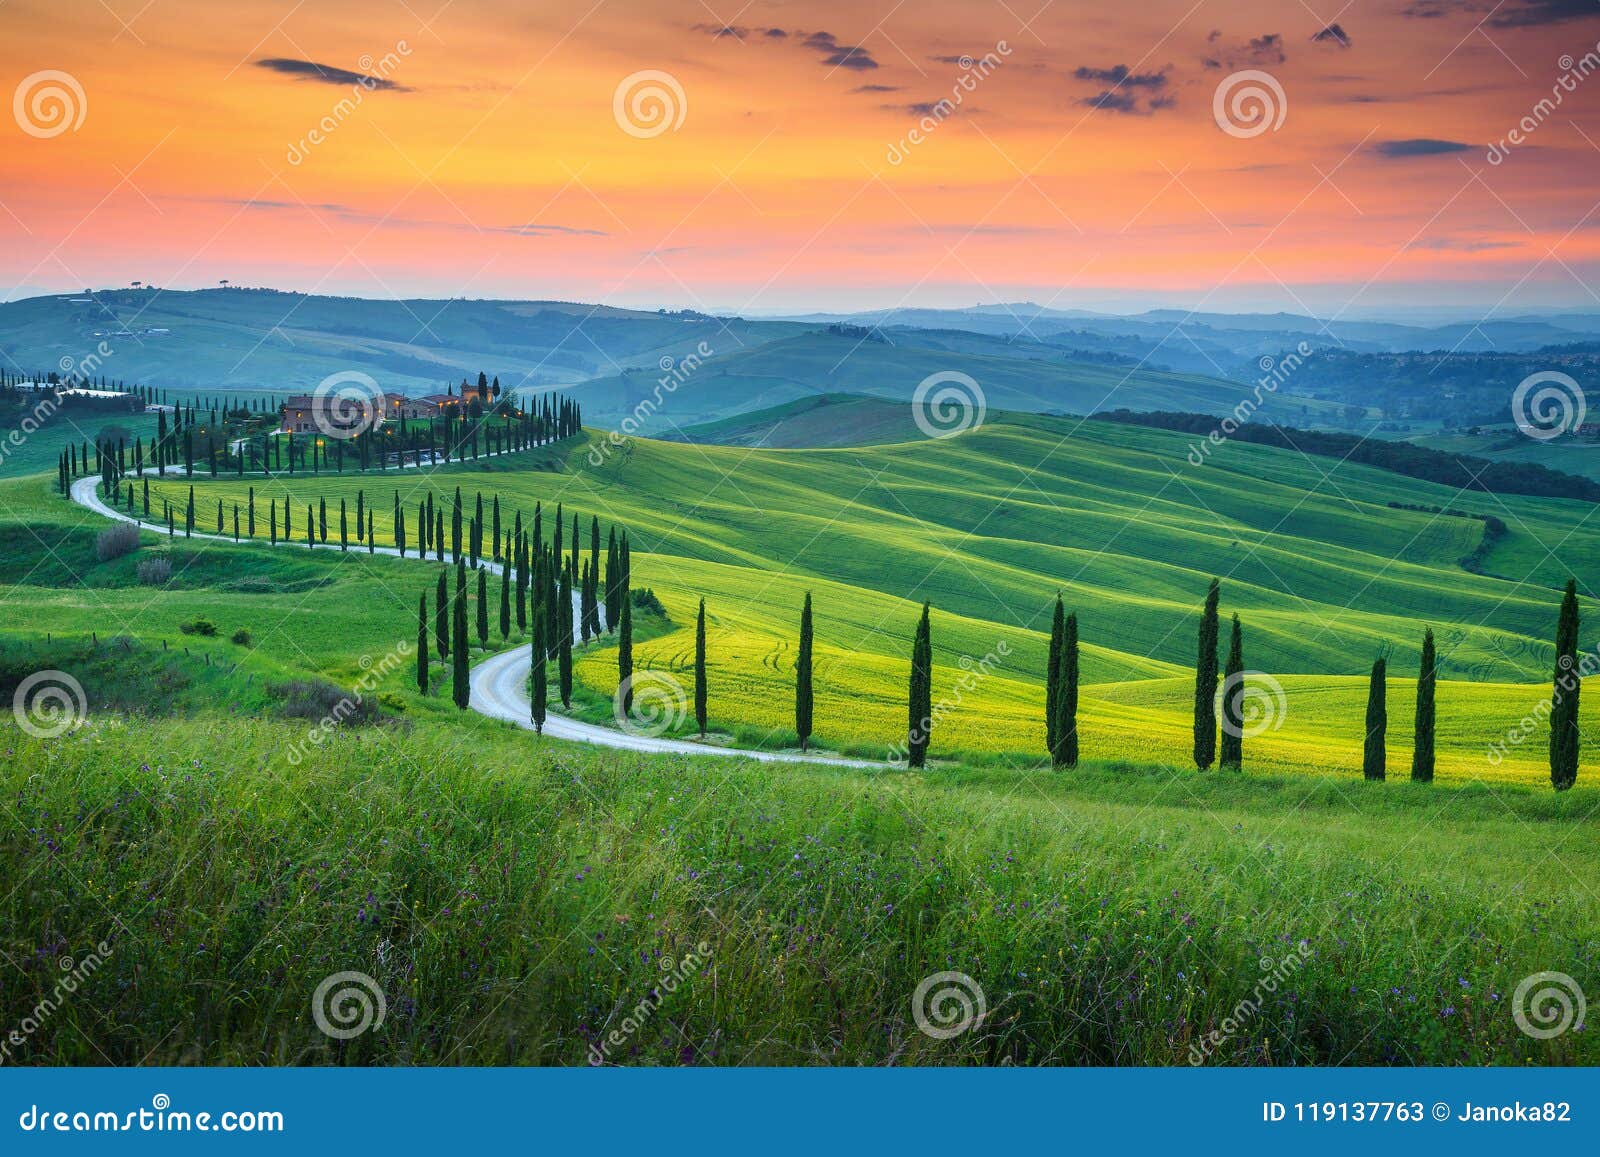 famous tuscany landscape with curved road and cypress, italy, europe